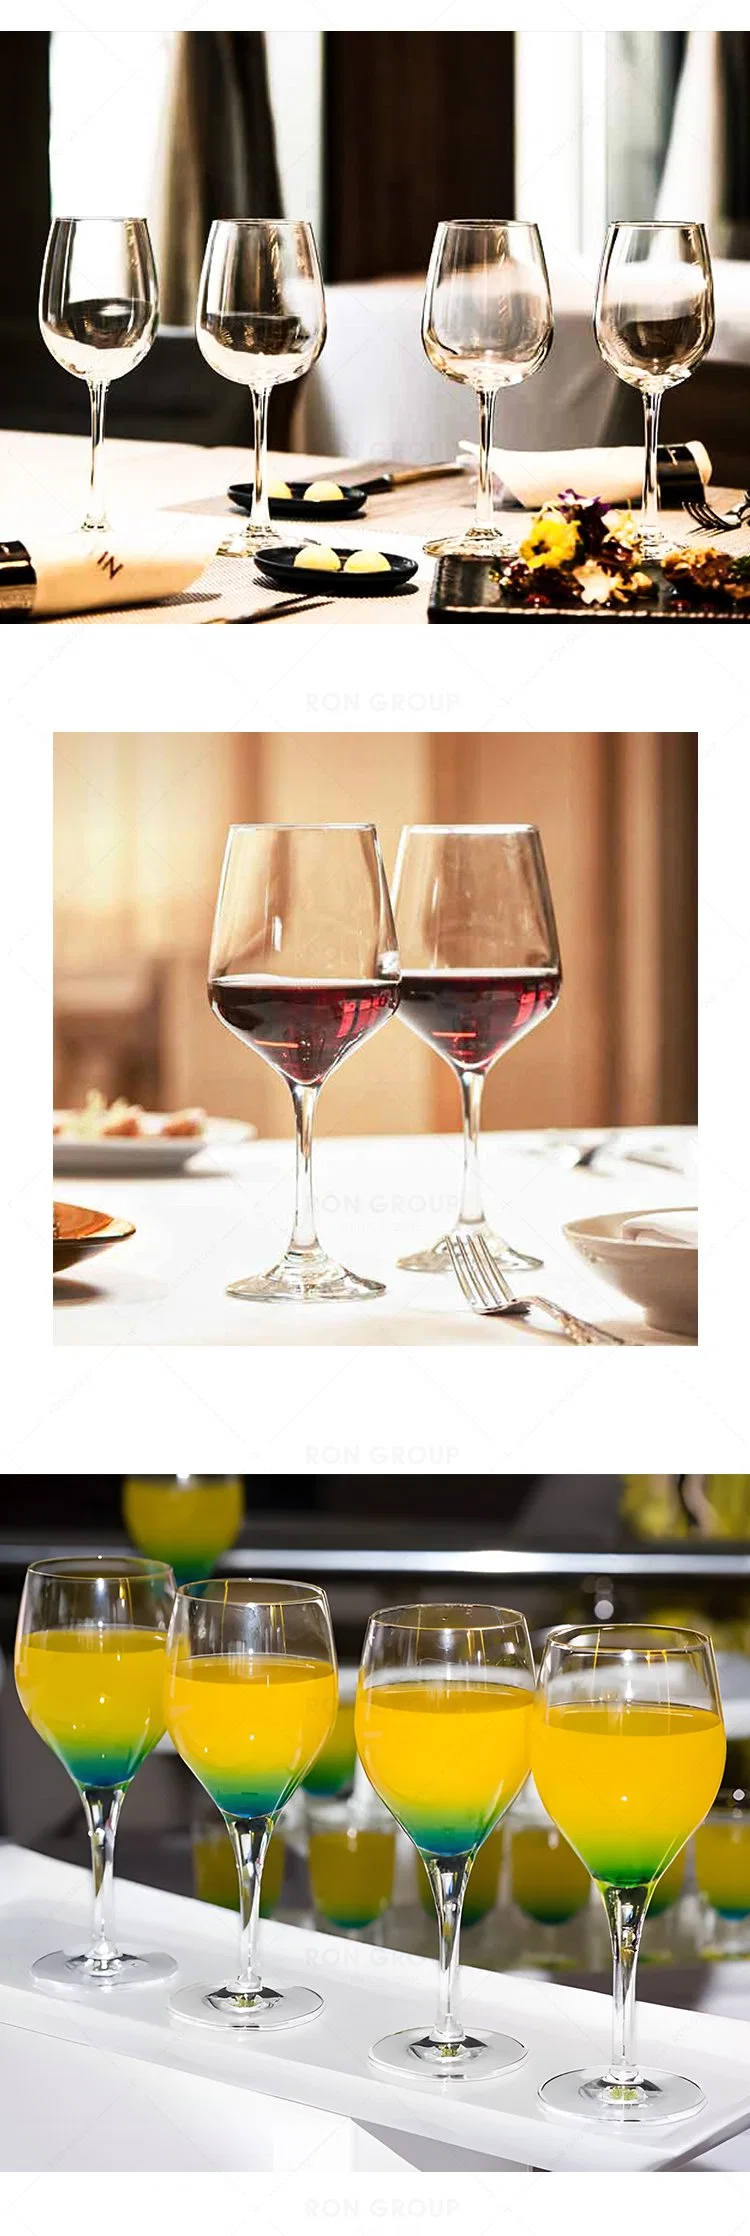 Brandy Red Wine Beer Glass Cup Glassware Drinkware for Party Dinner Bar Hotel Restaurant